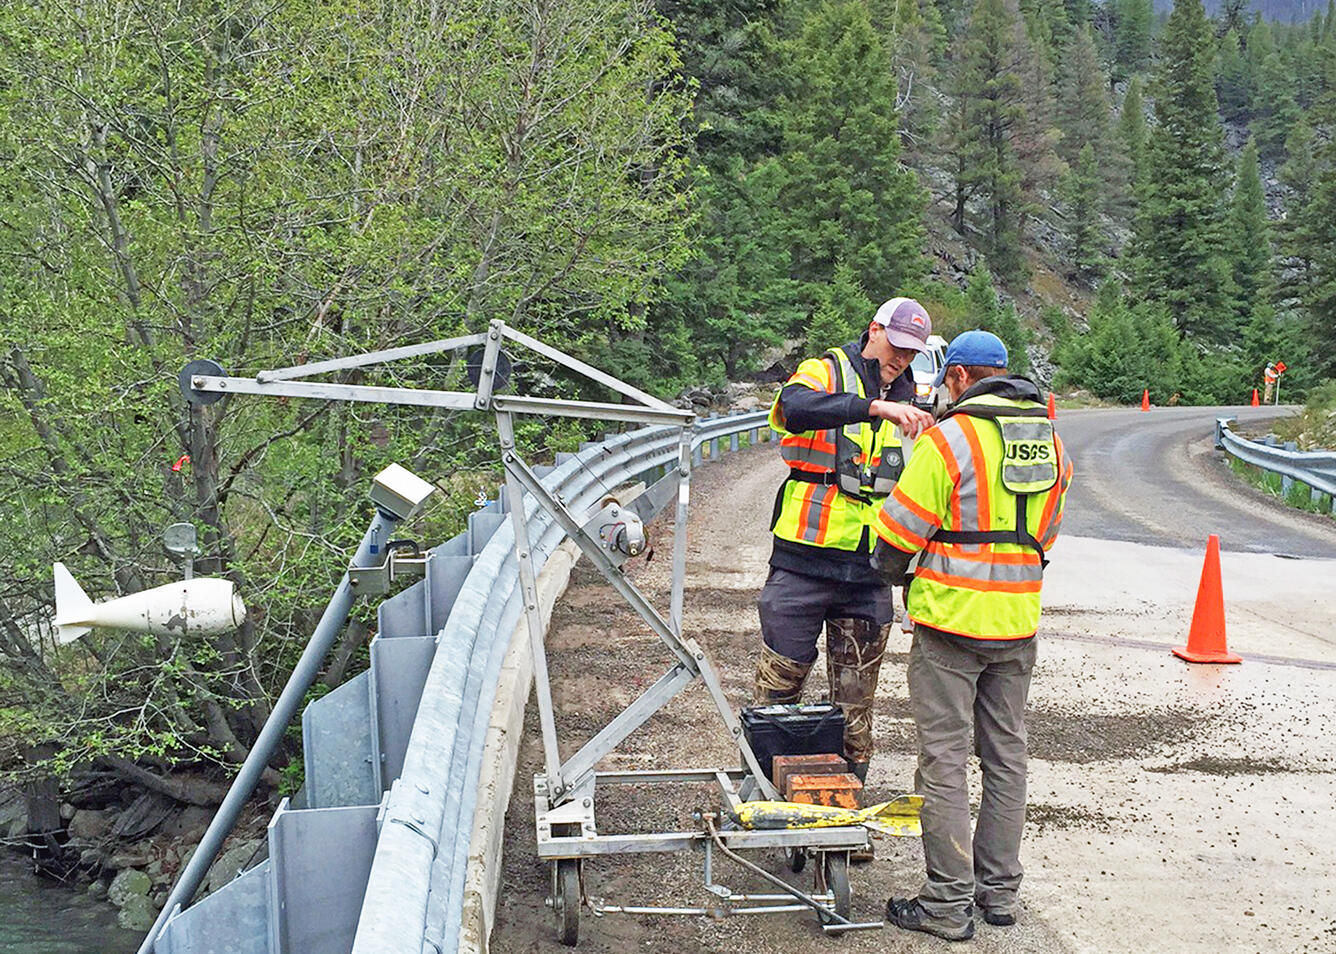 USGS hydrologic technicians collect a sediment sample from the Yankee Fork of the Salmon River